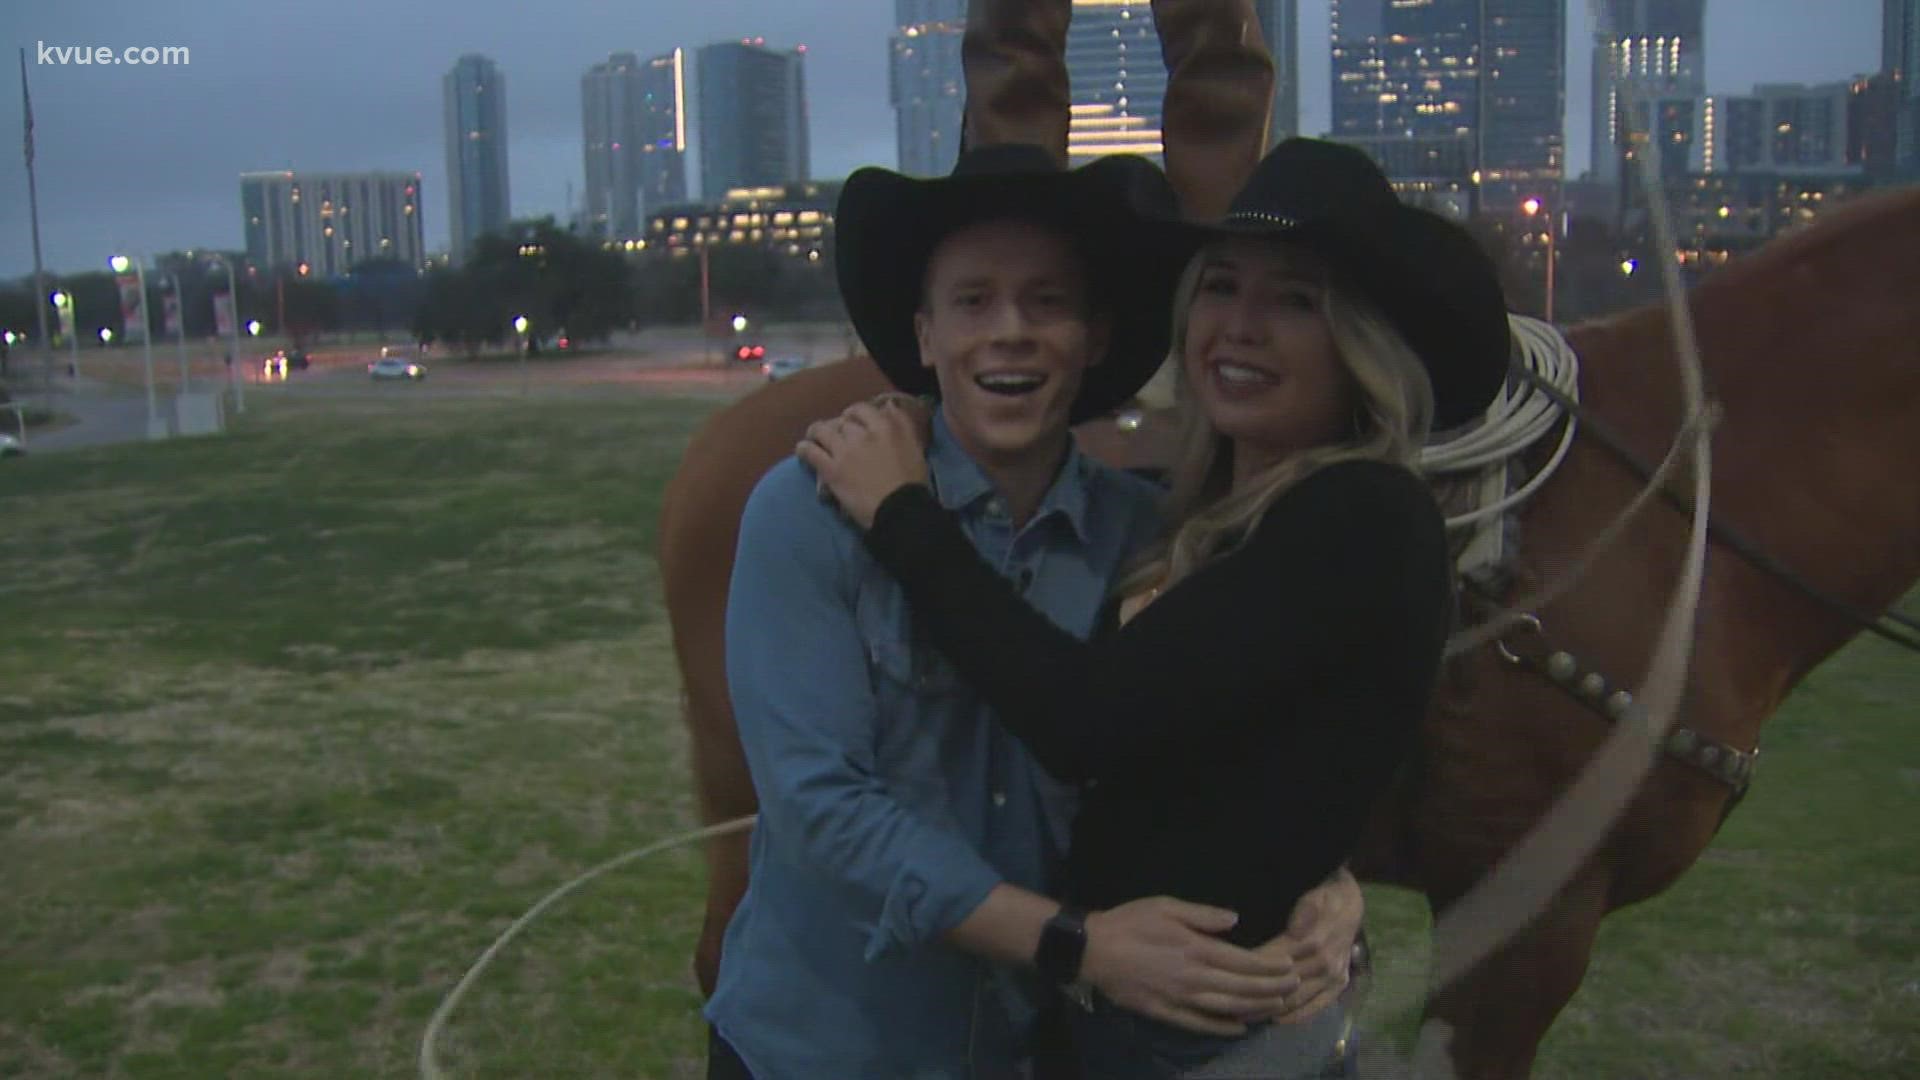 Rodeo Austin is kicking off their festivities with their annual Cowboy Breakfast.